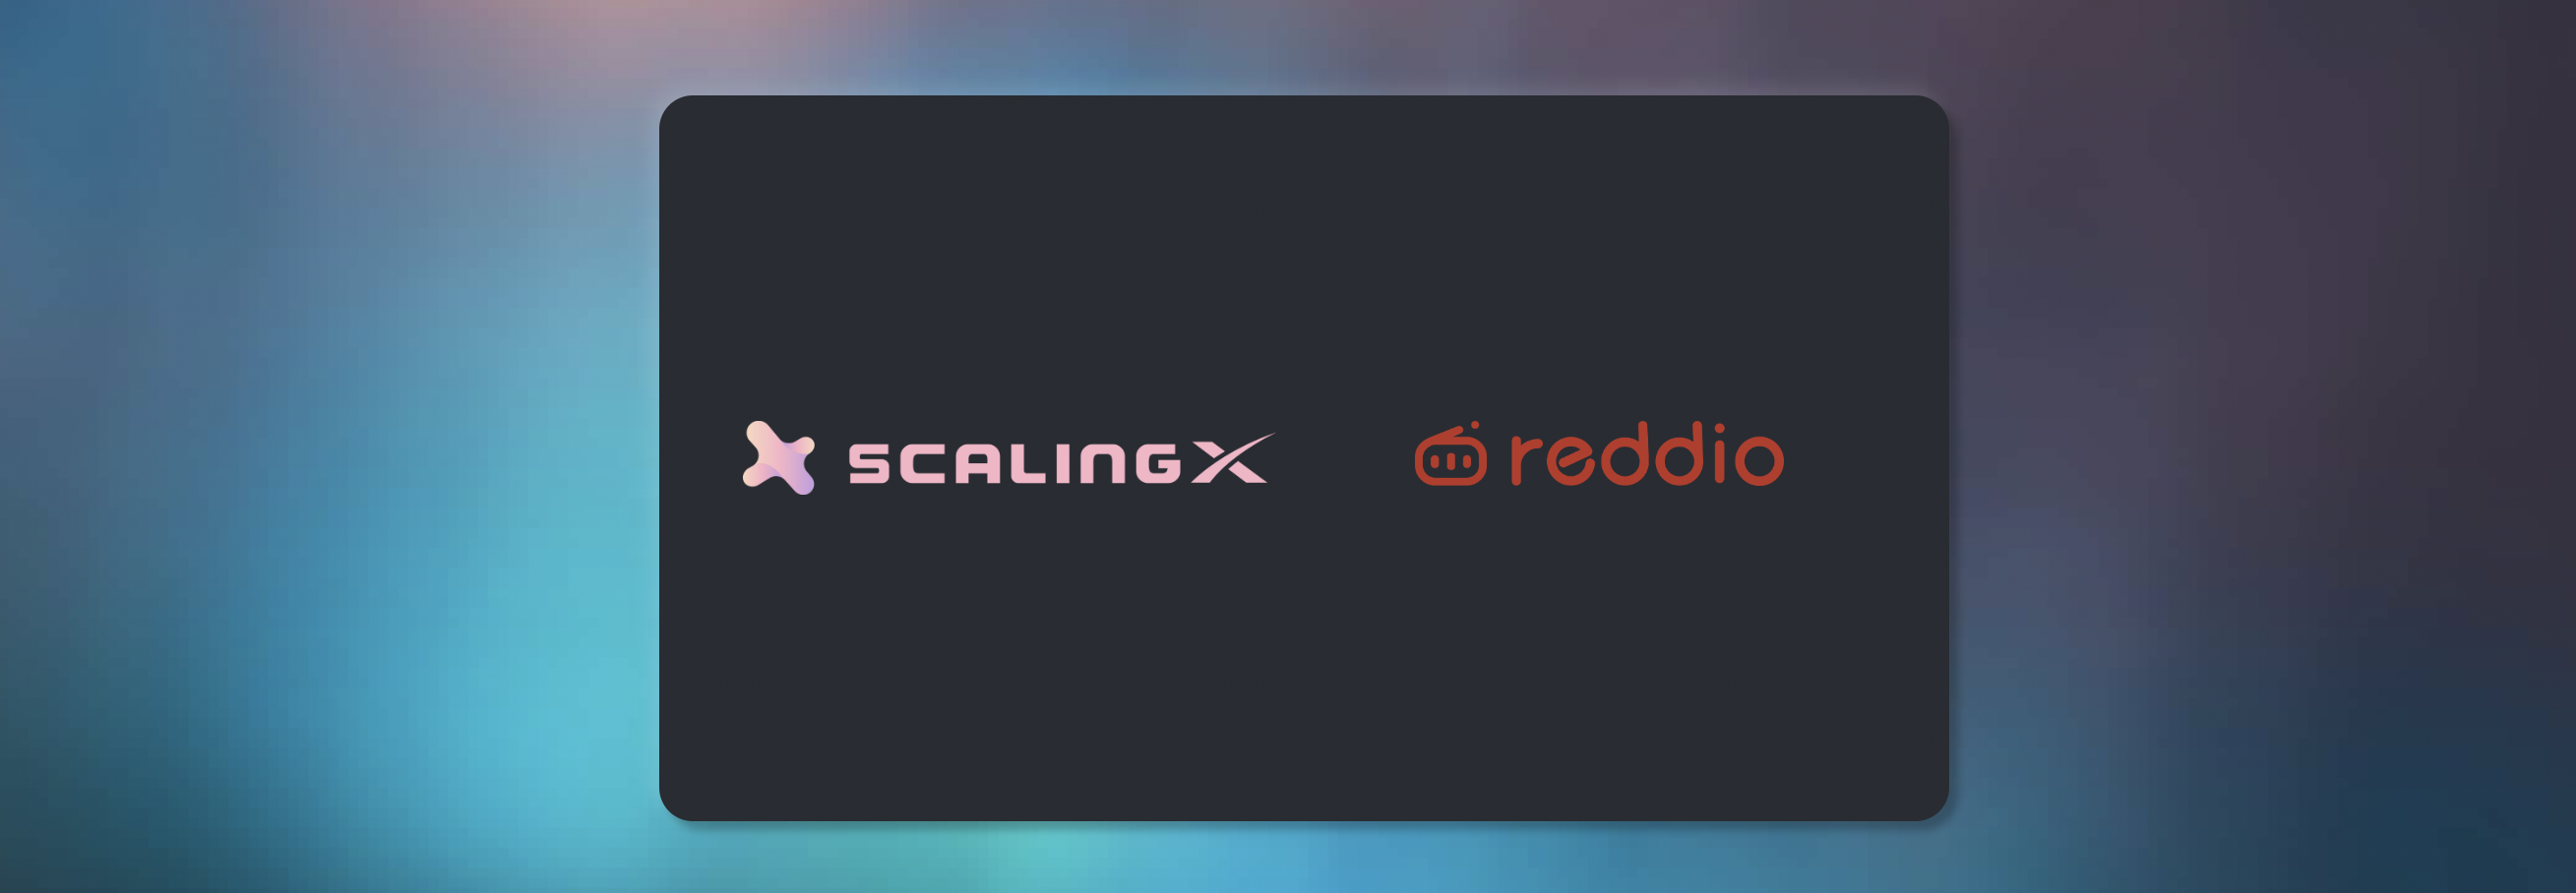 ScalingX Partners with Reddio to Incubate Web3 Startups